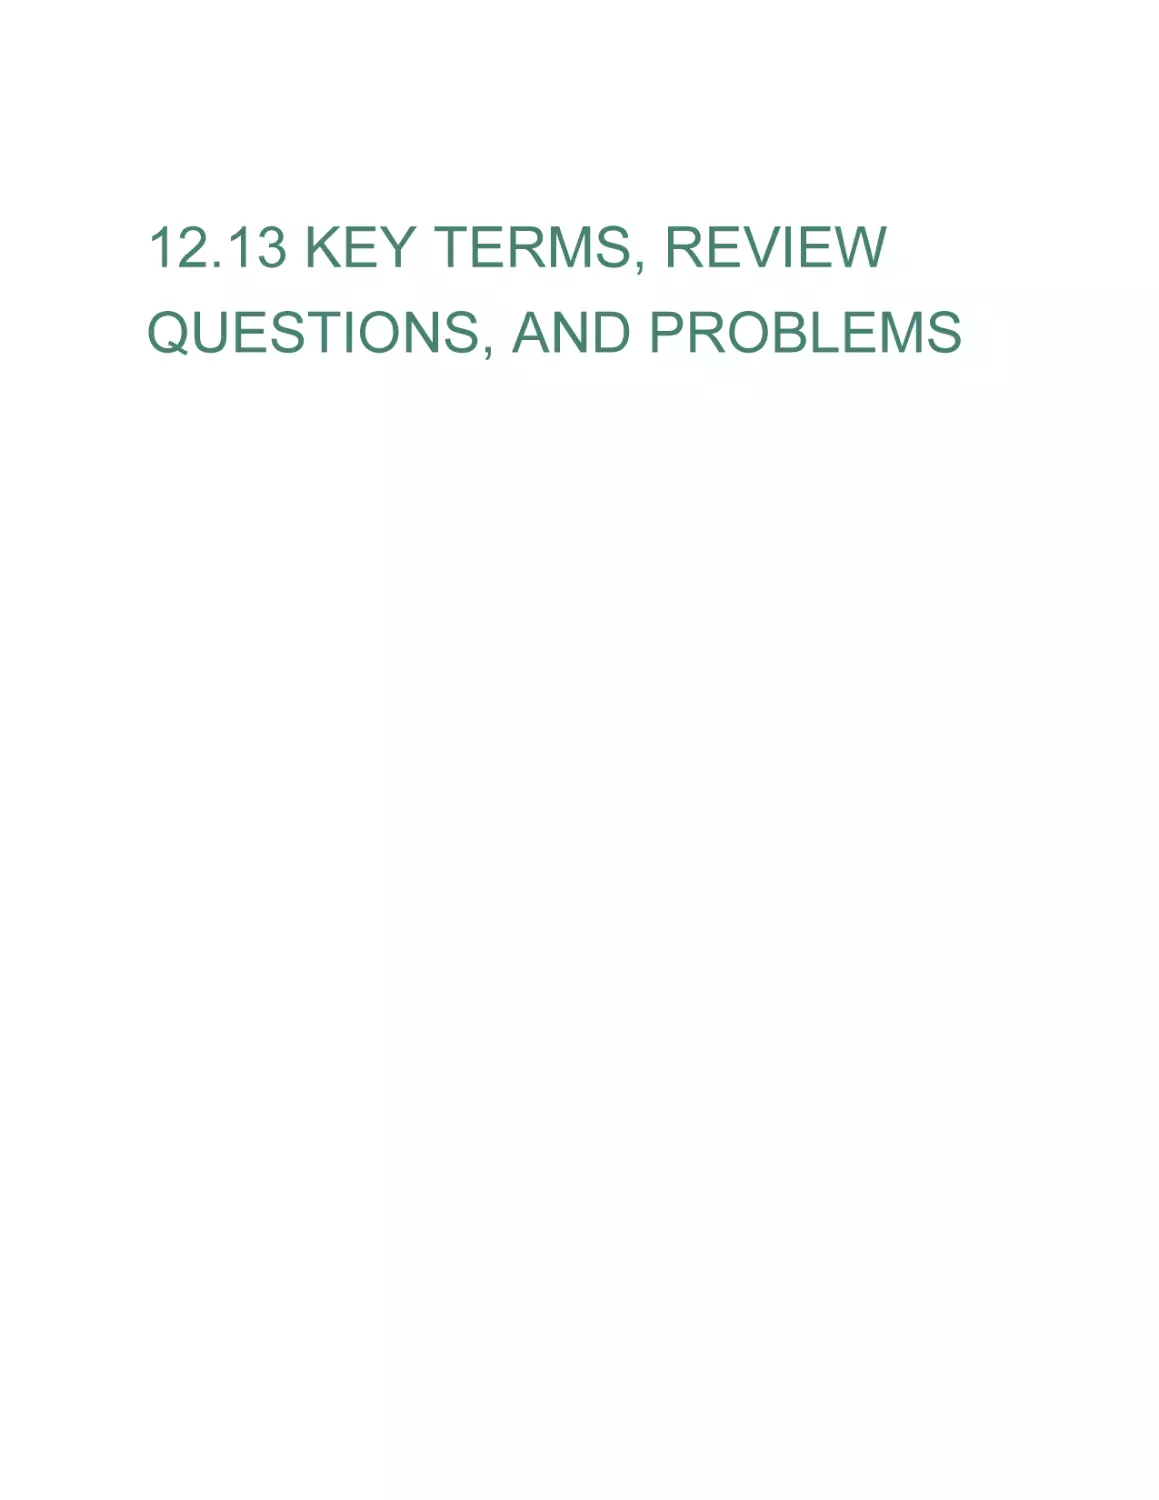 12.13 KEY TERMS, REVIEW QUESTIONS, AND PROBLEMS